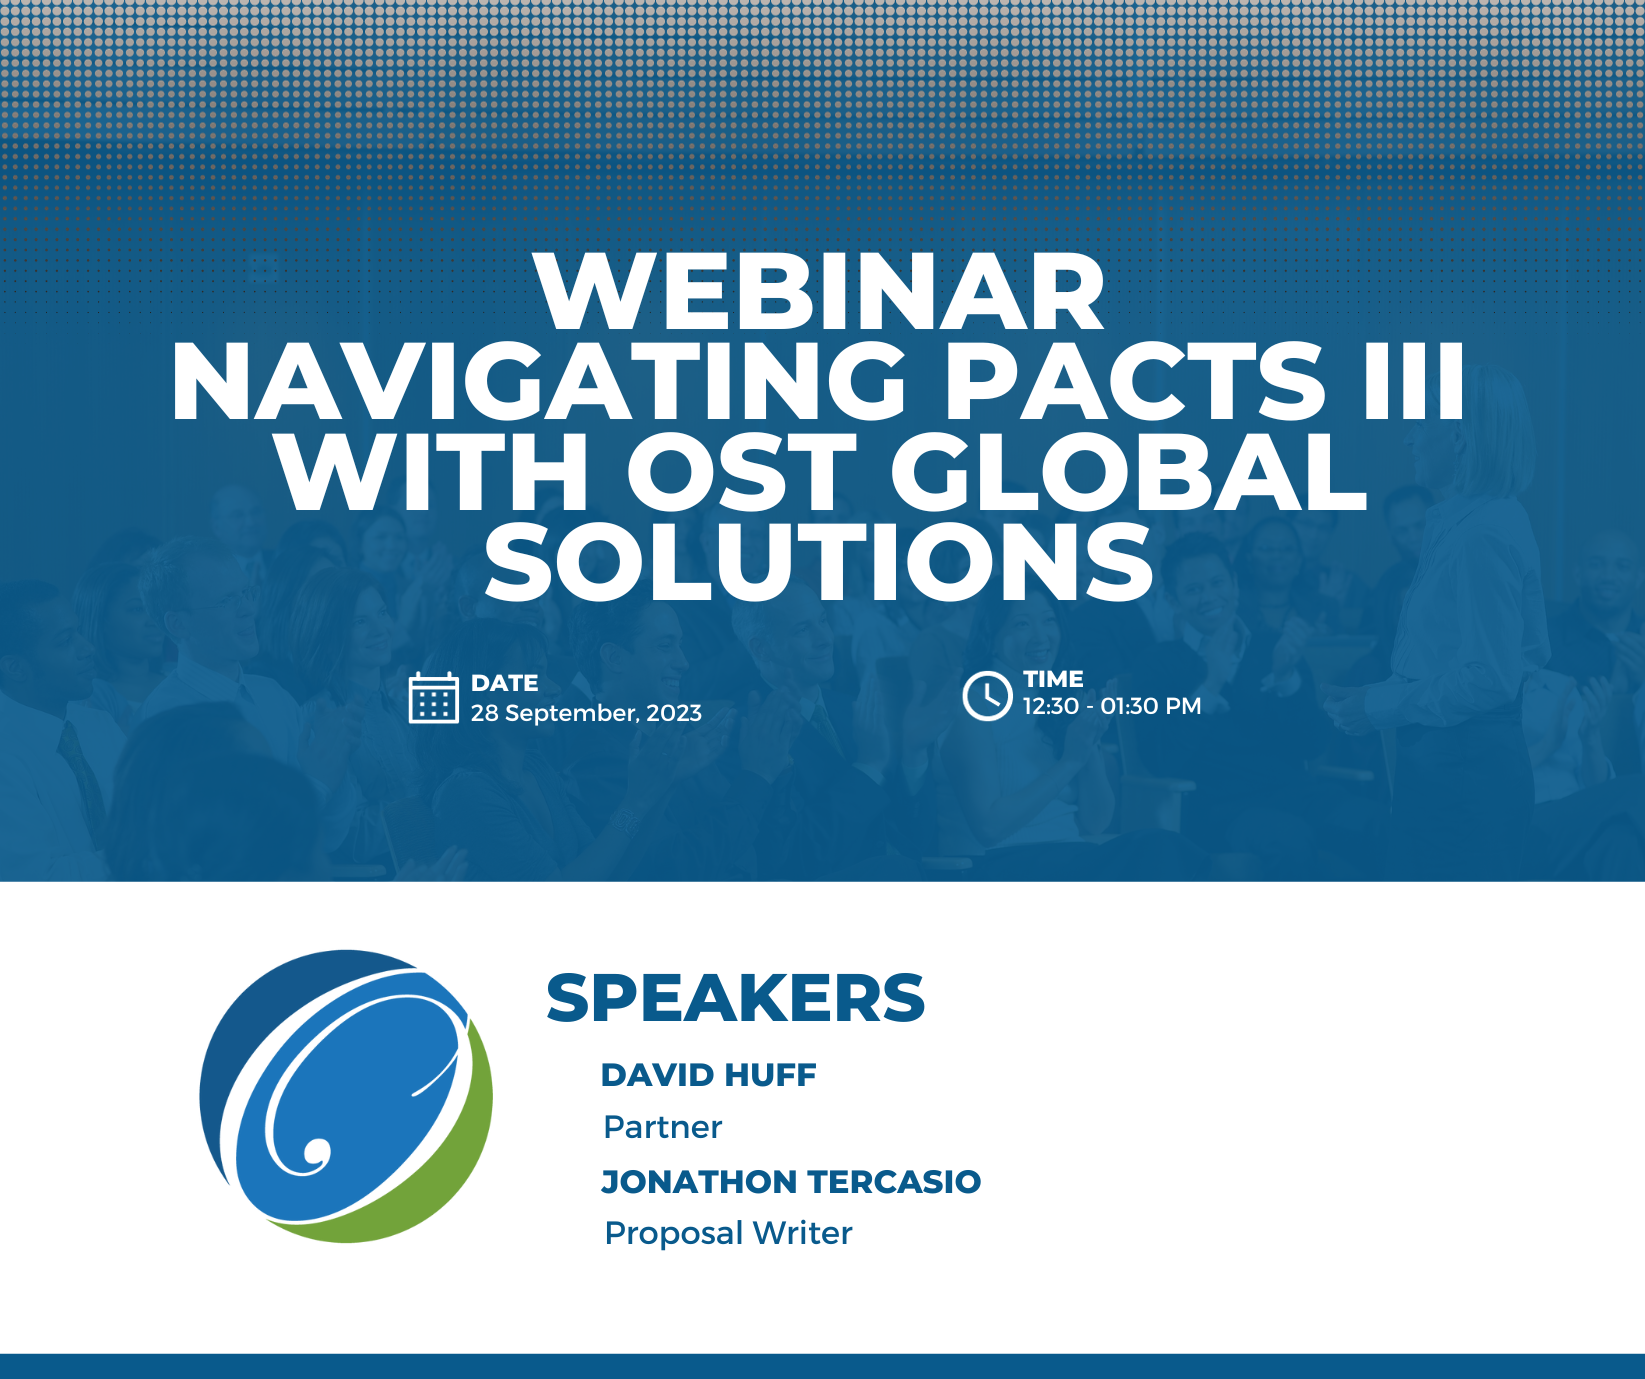 Webinar Announcement: Navigating PACTS III with OST Global Solutions